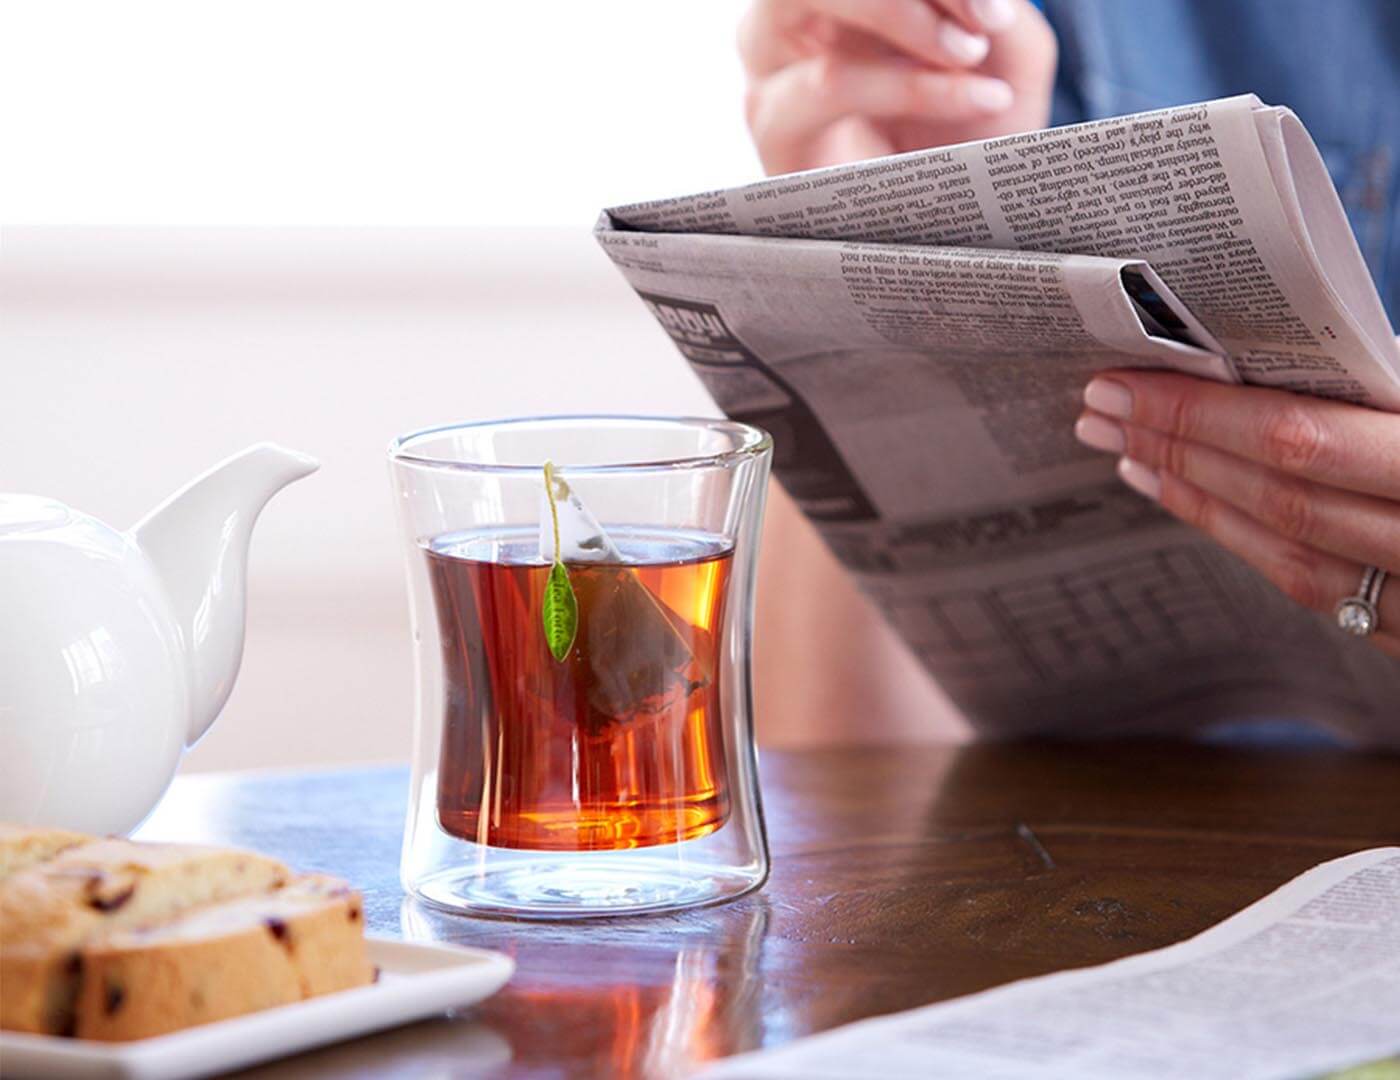 Poom cup with infuser at breakfast, reading newspaper